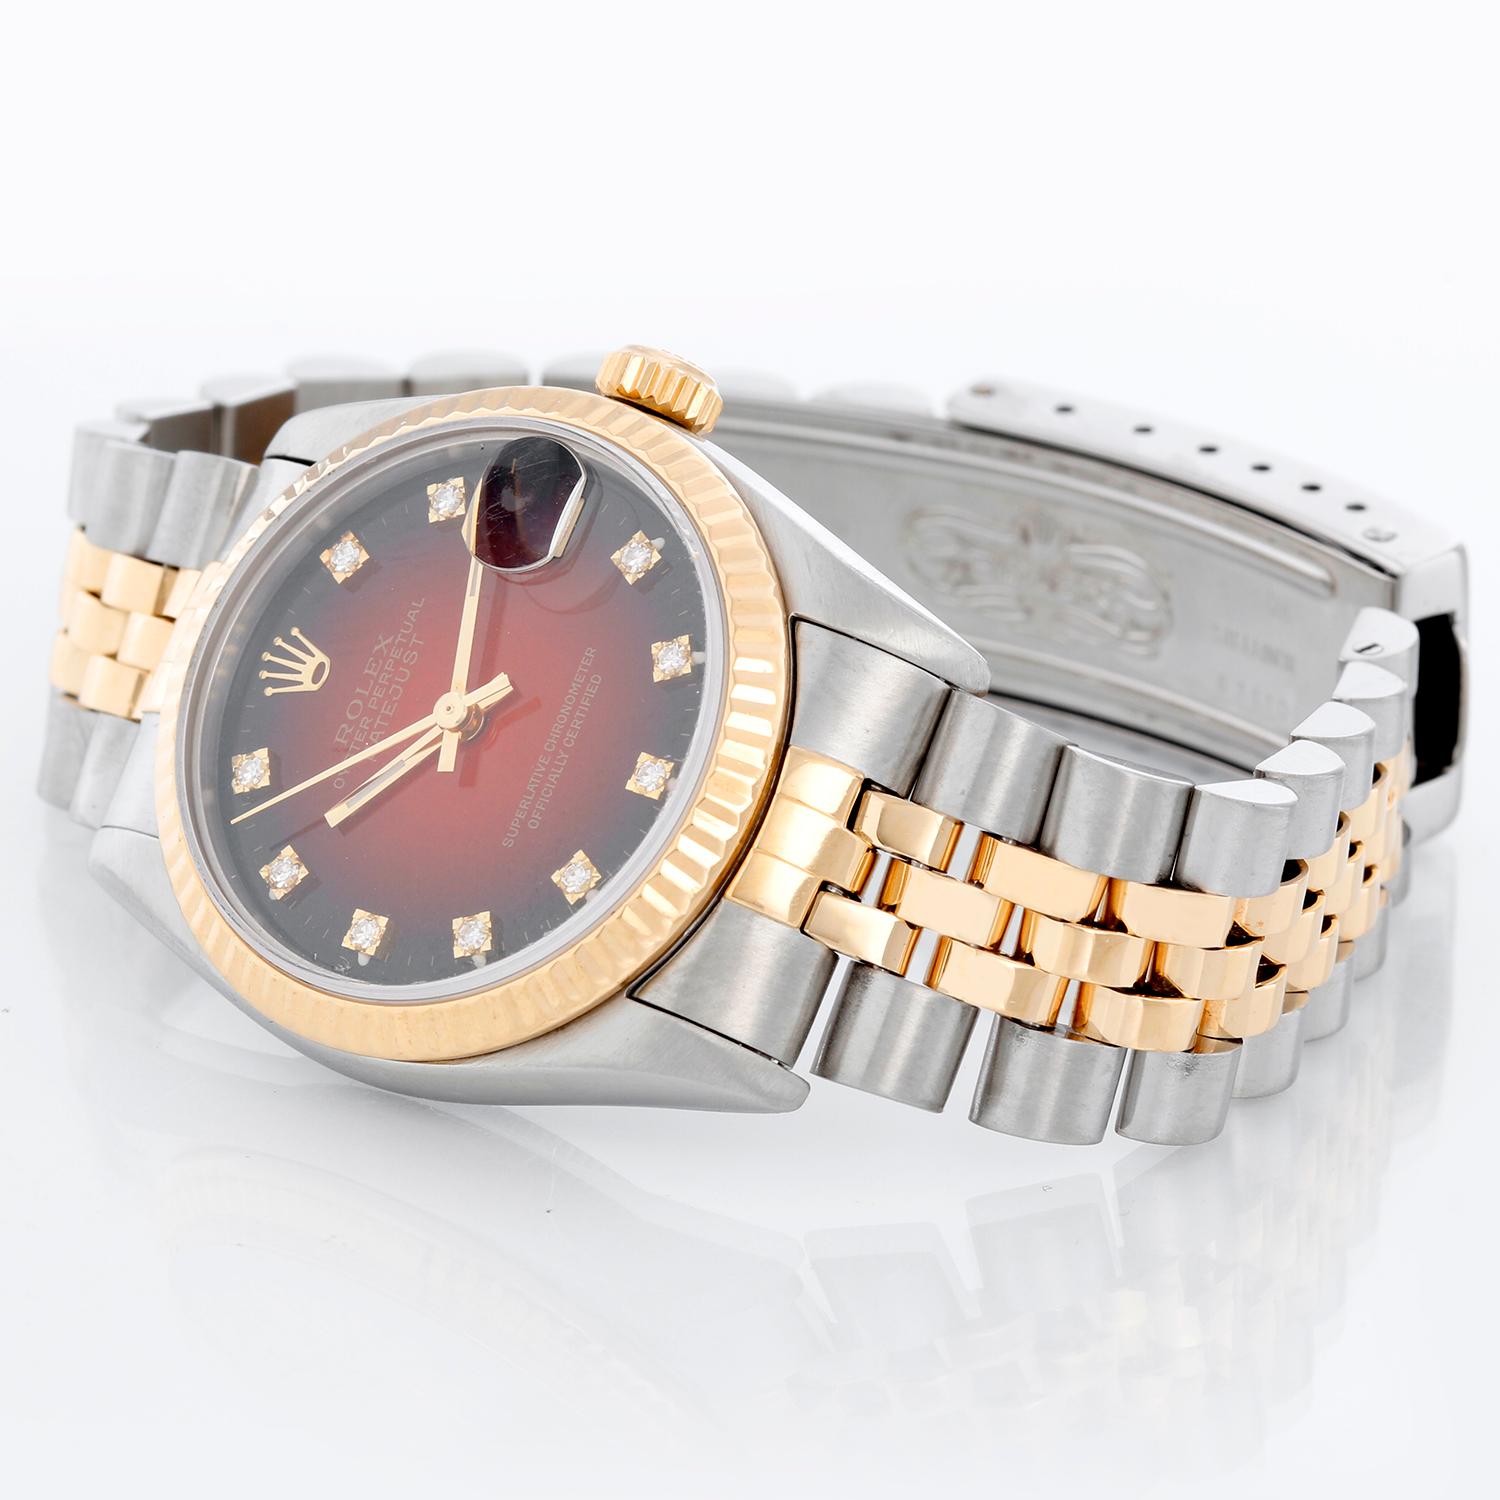 Rolex Datejust Midsize 2-Tone Watch Red Vignette Dial 68273 - Automatic winding, 29 jewels, Quickset, sapphire crystal.  Stainless steel case with 18k yellow gold  fluted bezel ( 31 mm ) . Factory Diamond Red Vignette Dial. Stainless steel and 18k